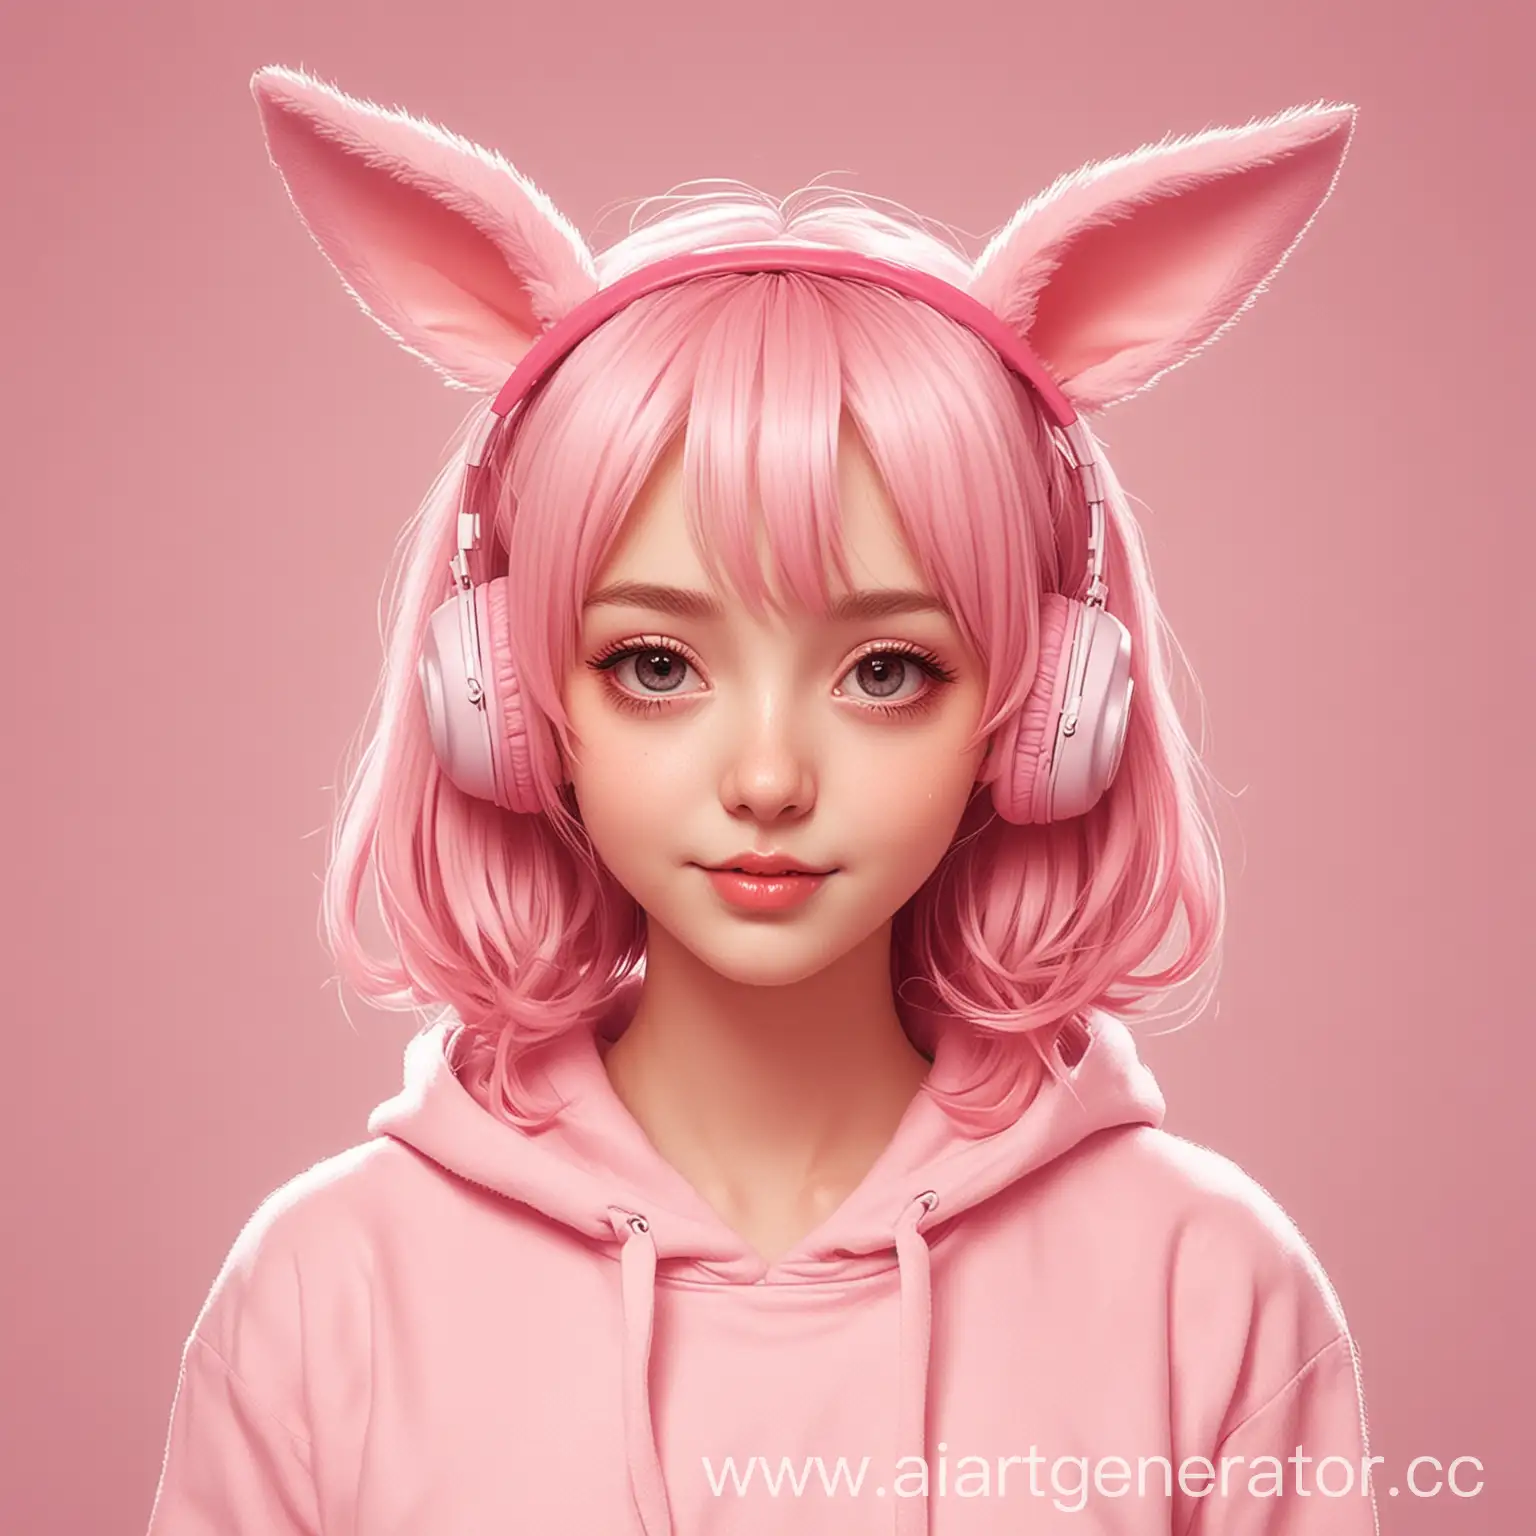 Anime-Girl-Wearing-Pink-Bunny-Ears-in-Vibrant-Art-Style